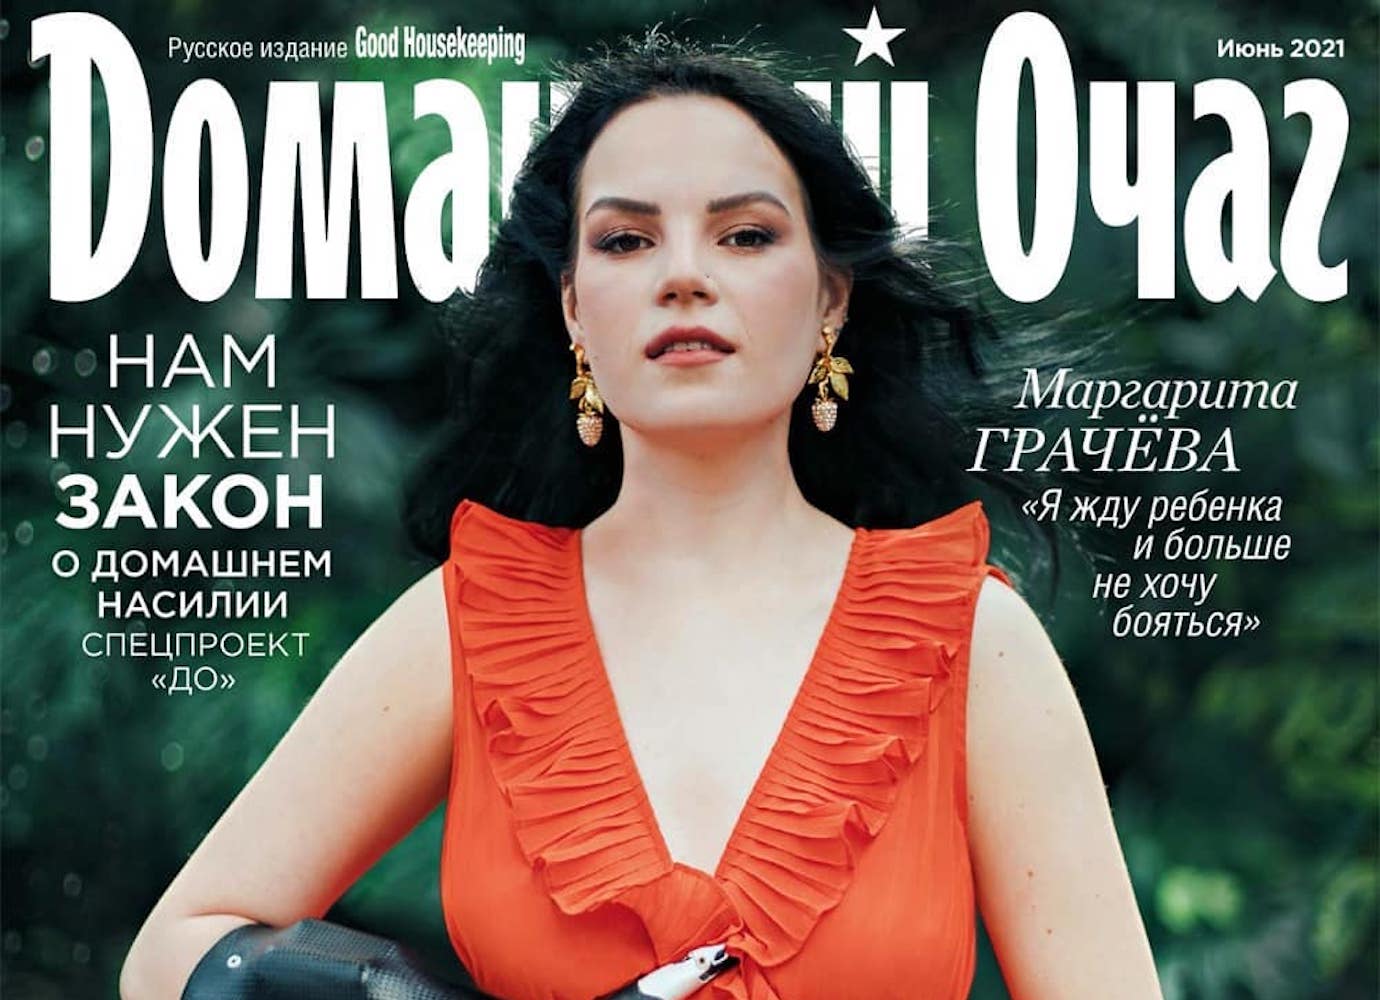 Good Housekeeping Russia campaigns for stronger laws on domestic violence with abuse survivor cover shoot